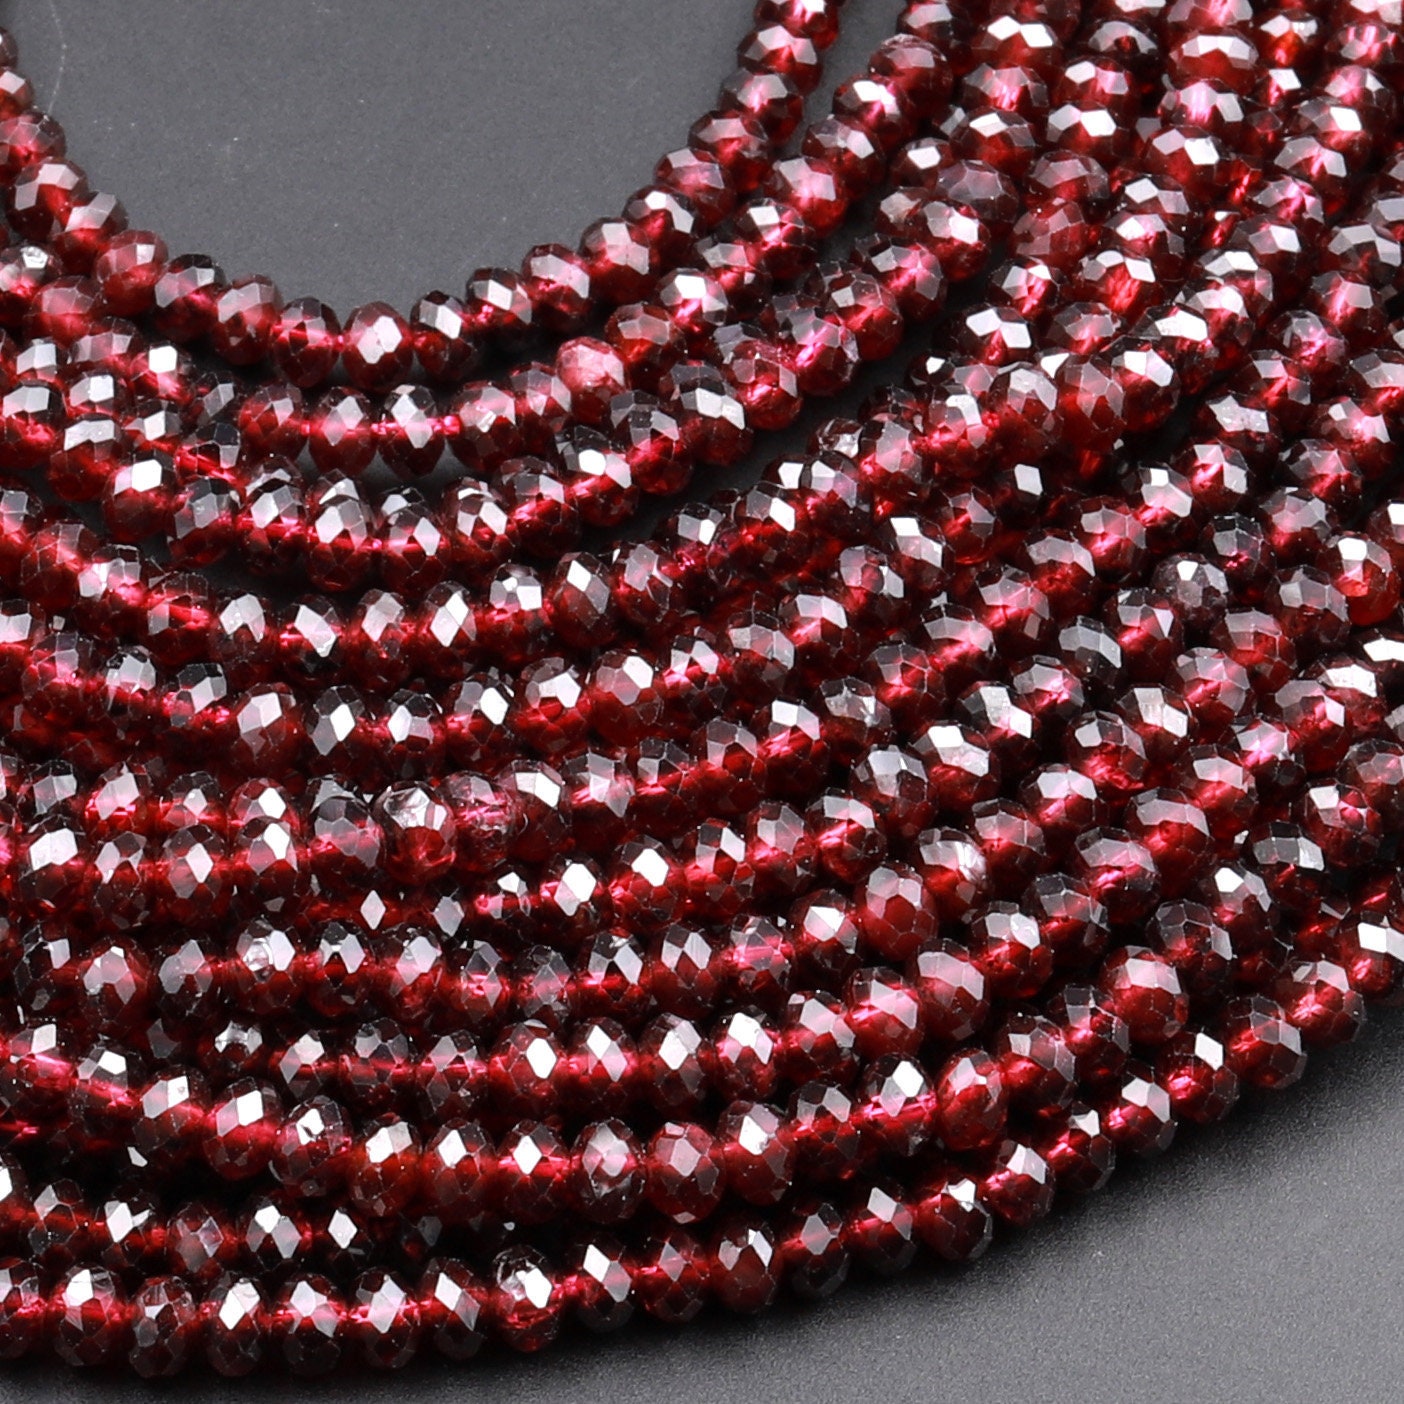 2X4mm AAA Faceted Rondelle Garnet Gems Loose Beads for Jewelry Making Strand 